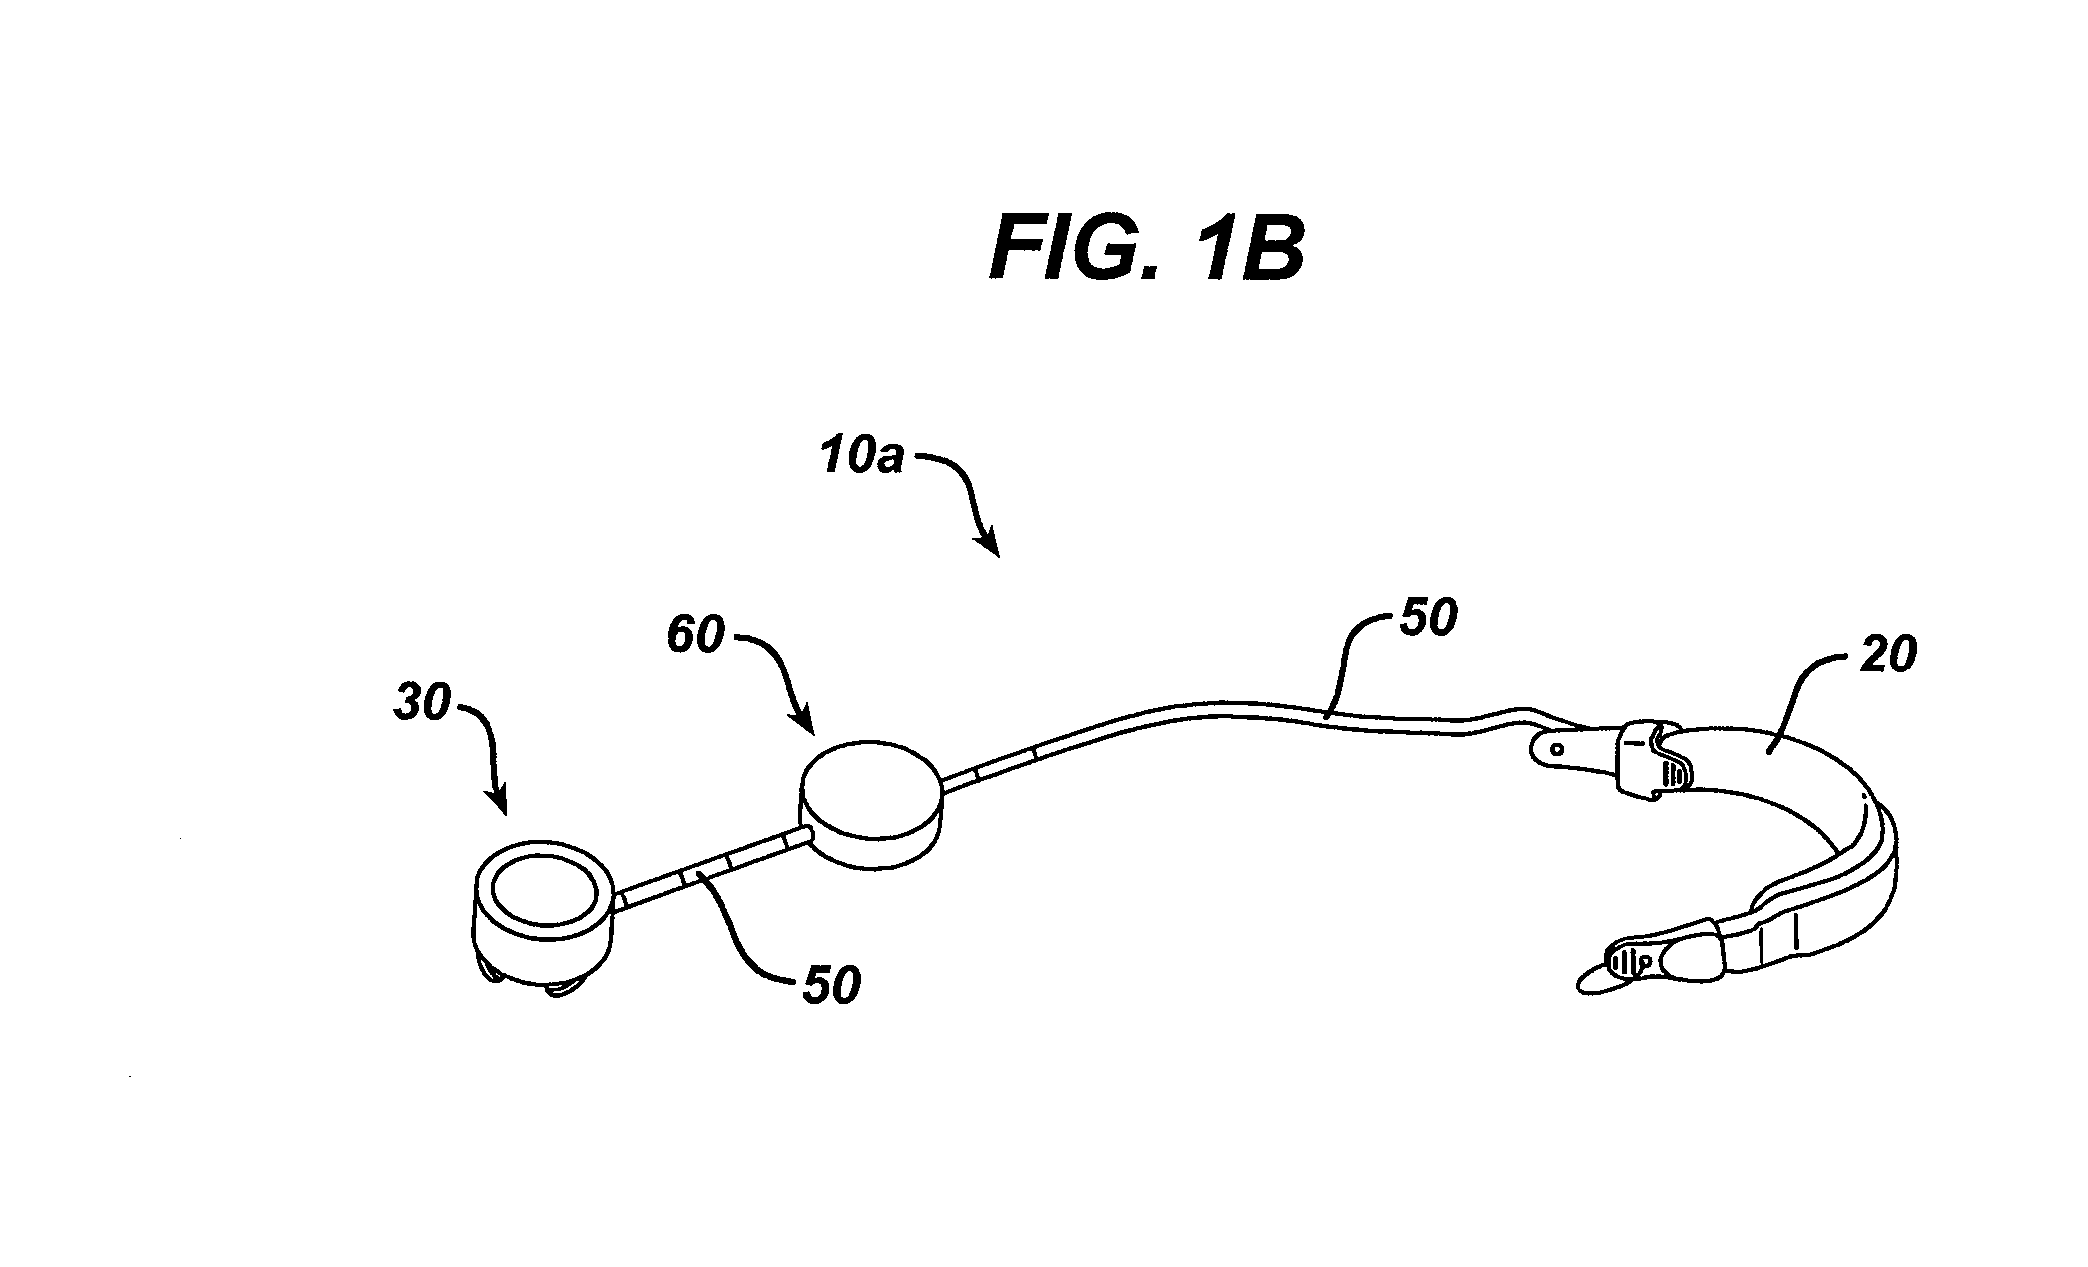 System and method of sterilizing an implantable medical device